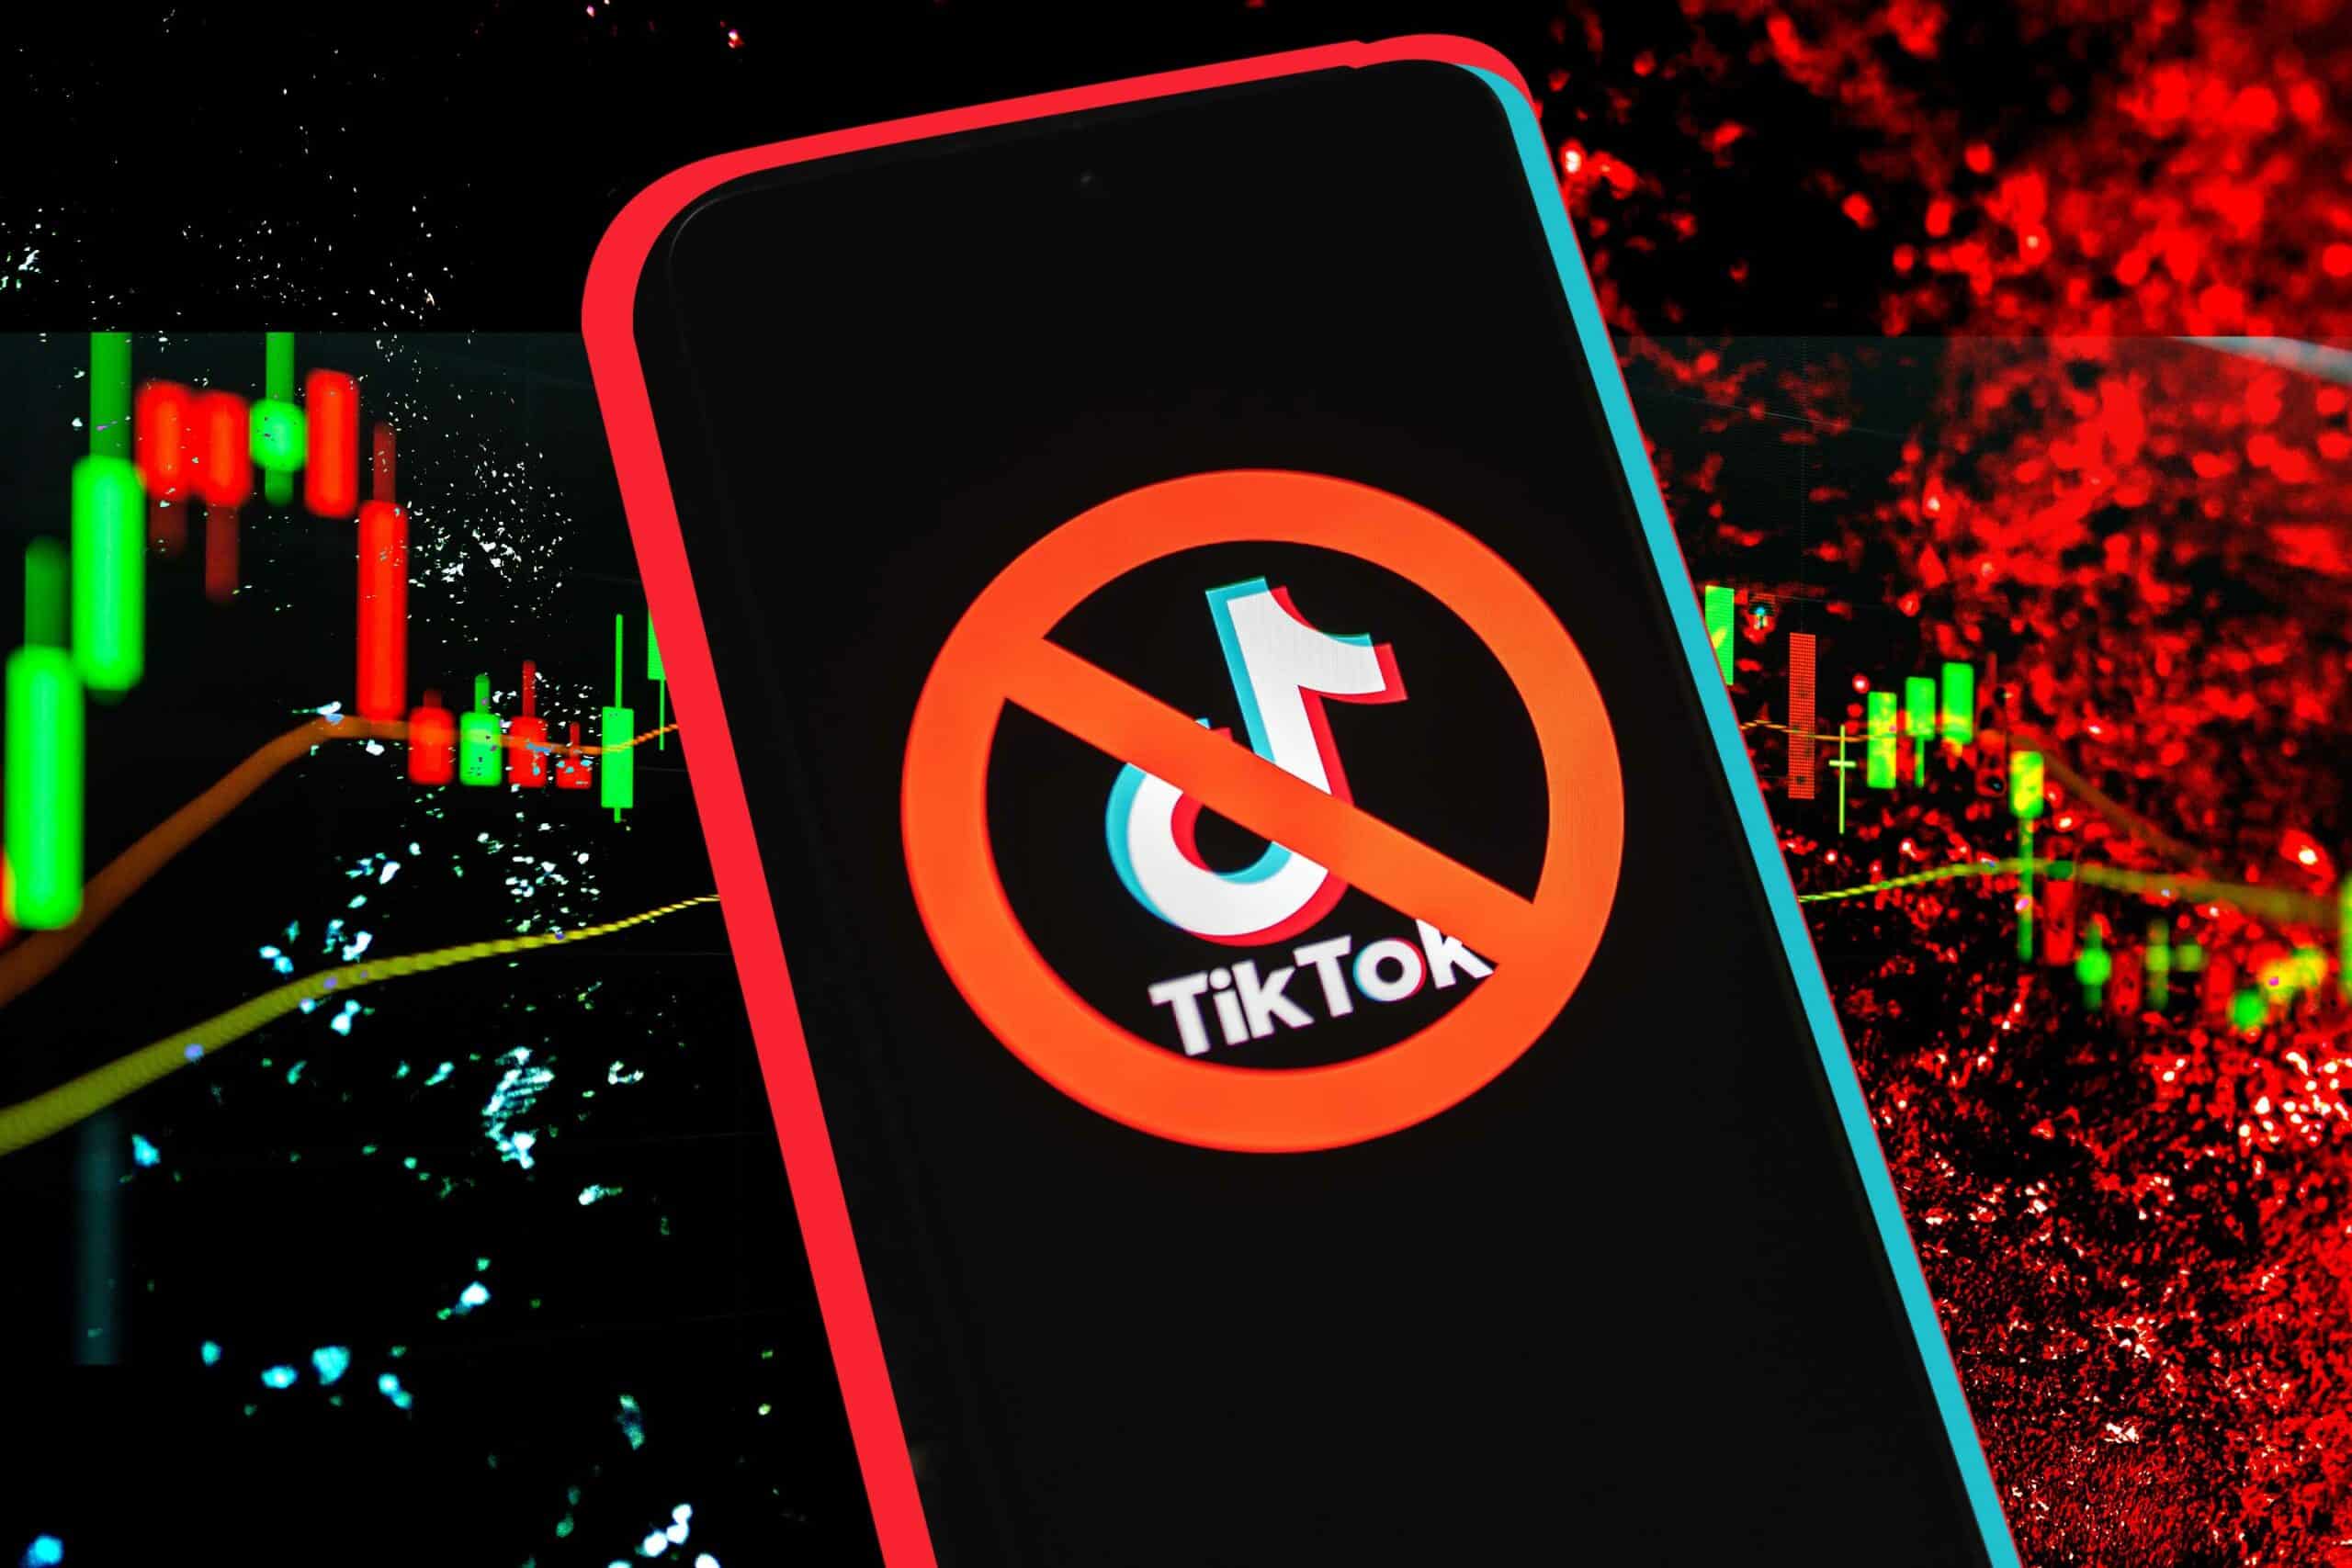 The United Kingdom is set to ban TikTok on government phones